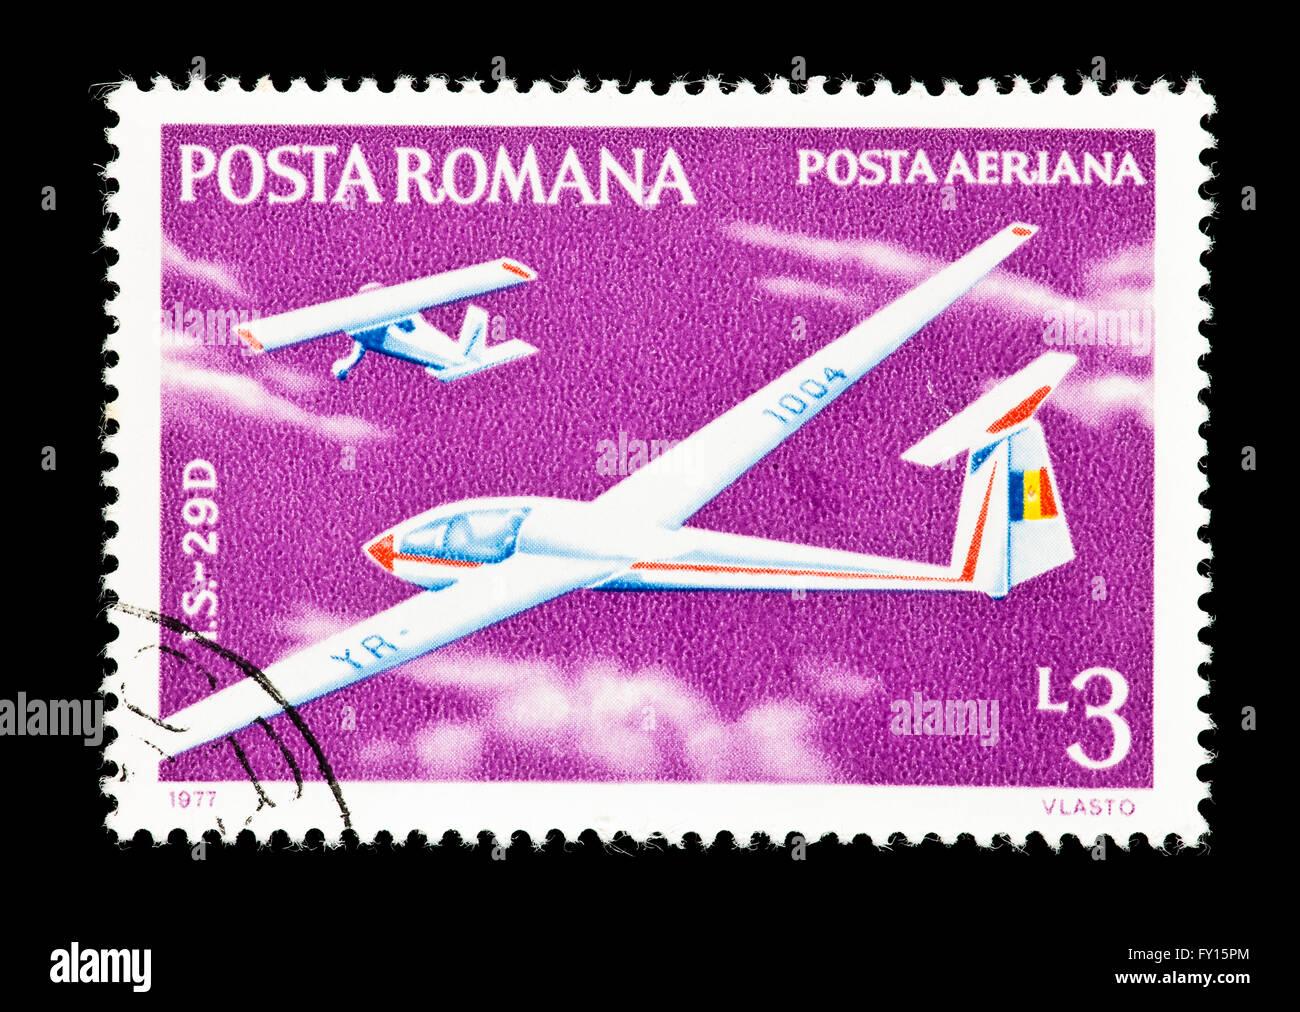 Postage stamp from Romania depicting an I.S-29D glider in flight. Stock Photo